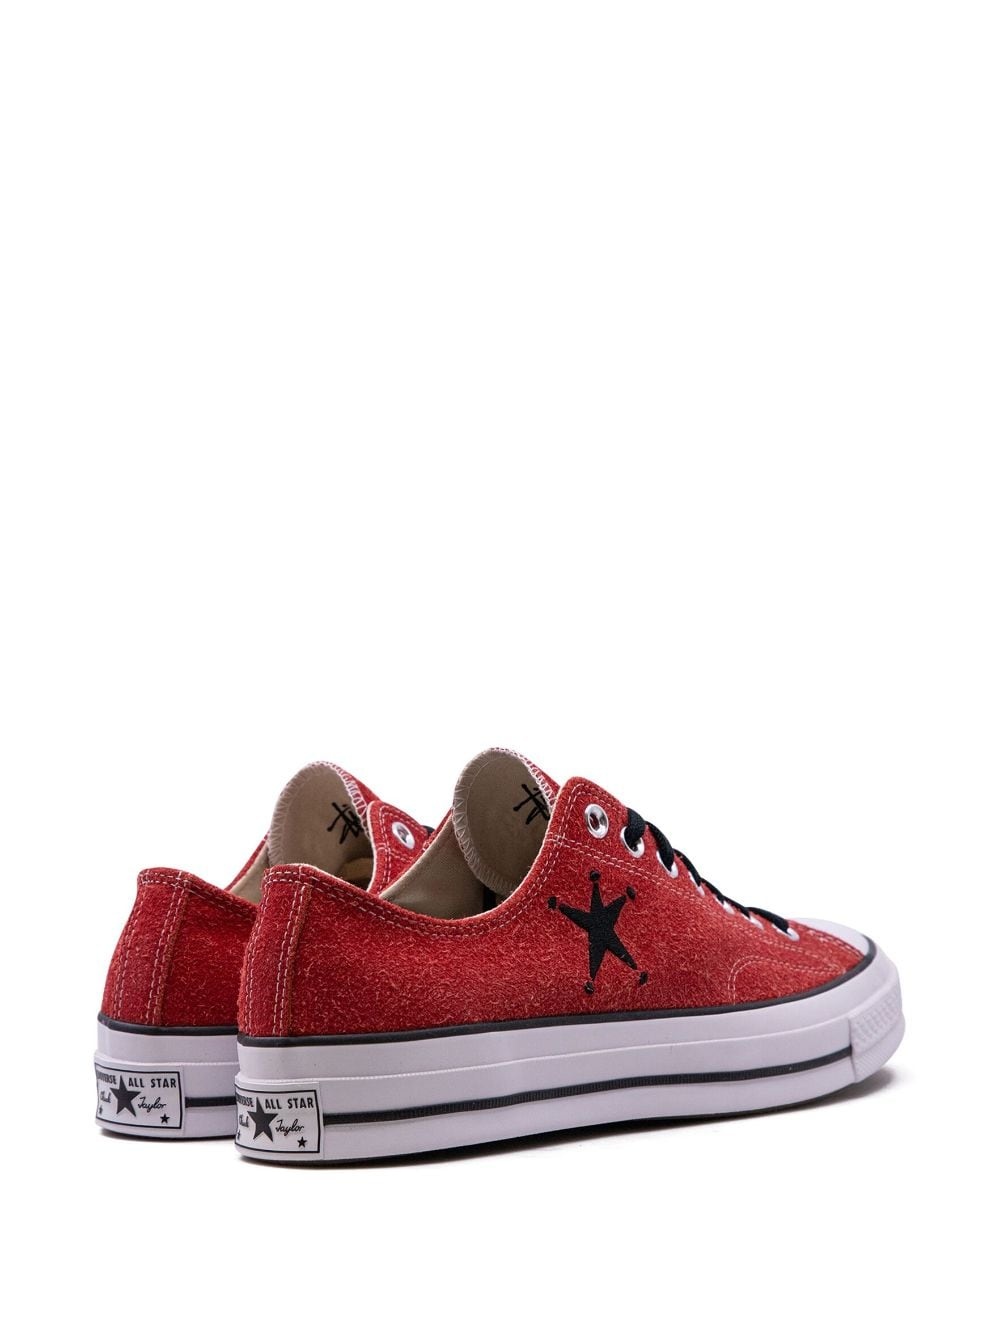 x Stussy Chuck 70 "Poppy Red" sneakers - 3